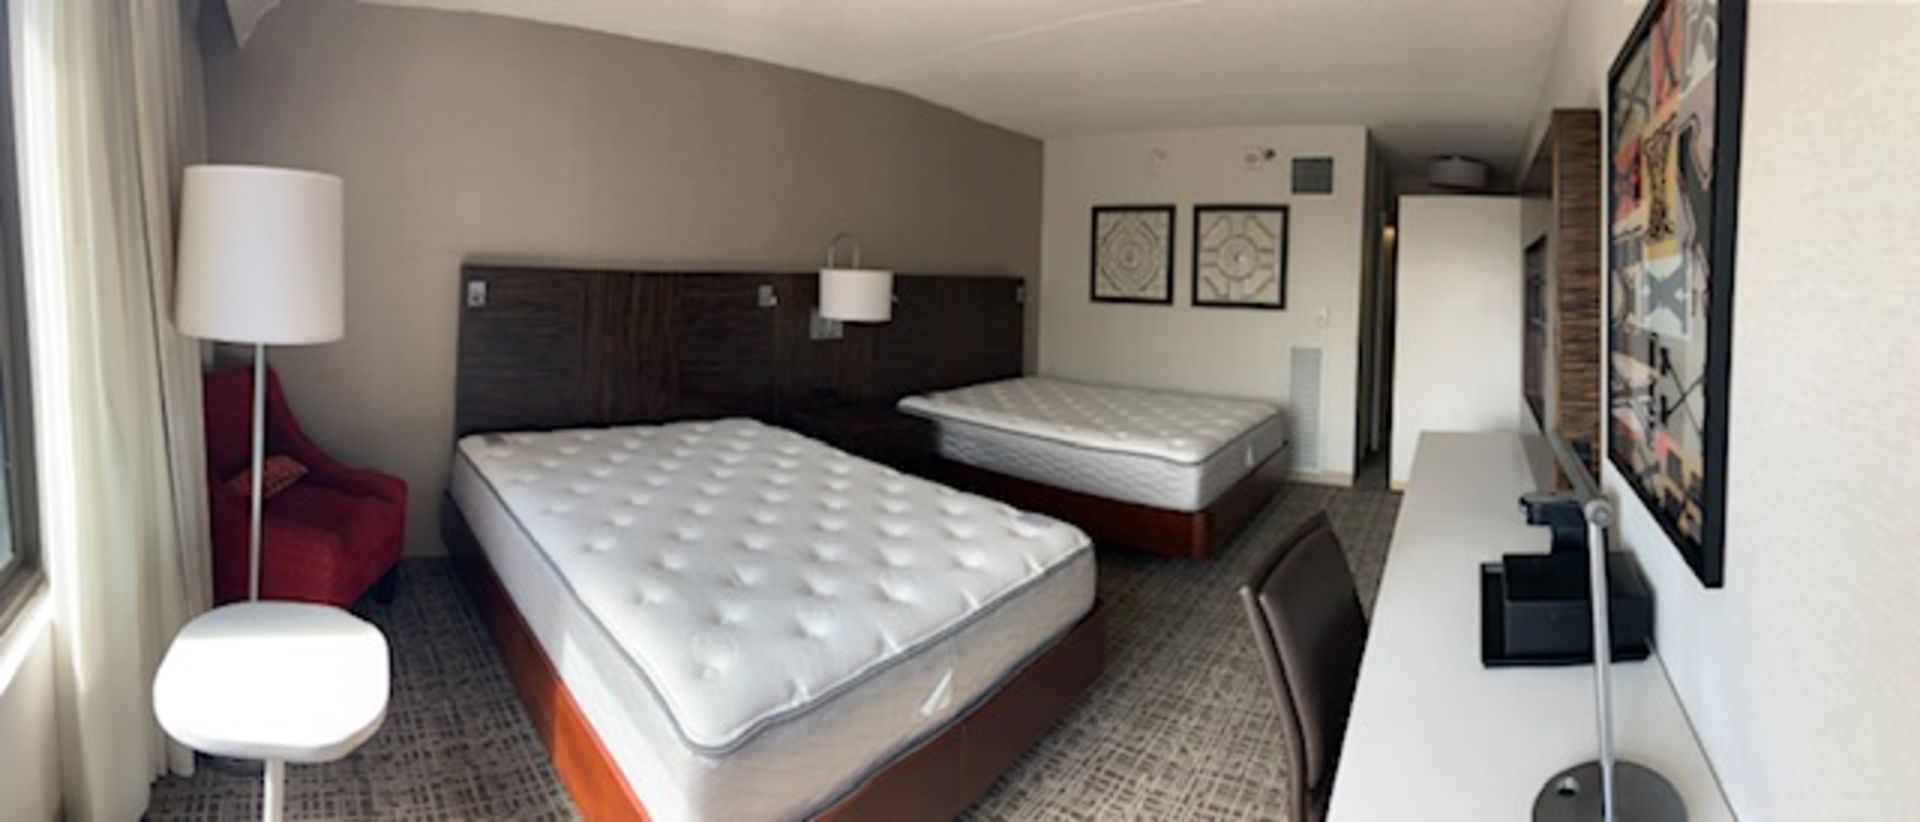 Queen Double Room - Furniture & Beds Only, Location / Room: 684